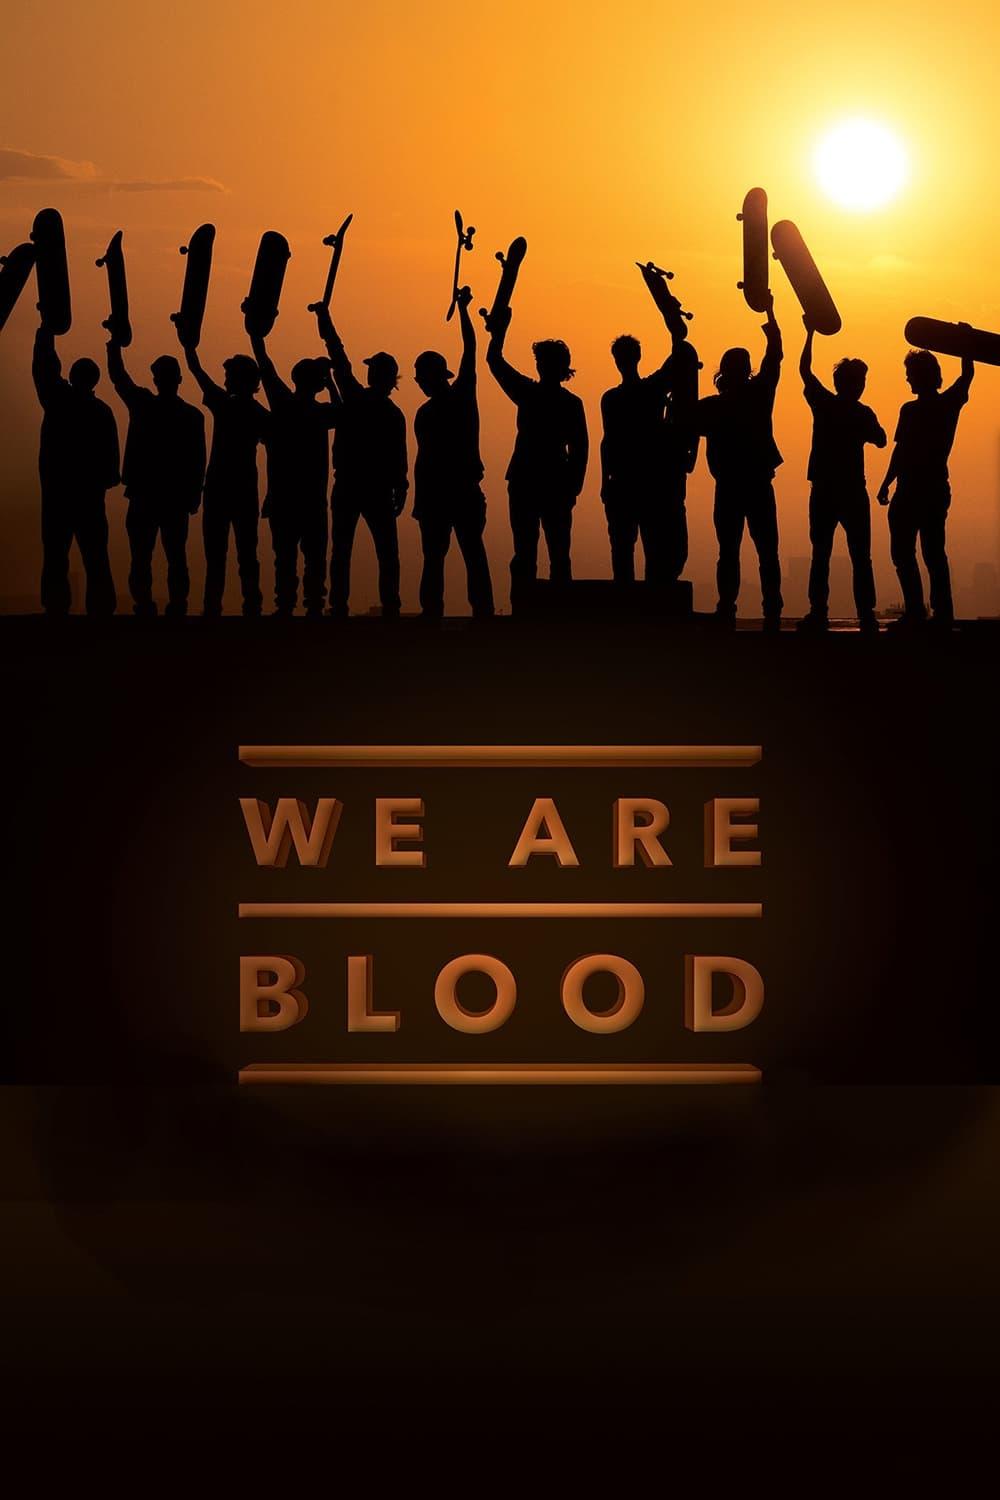 We Are Blood poster